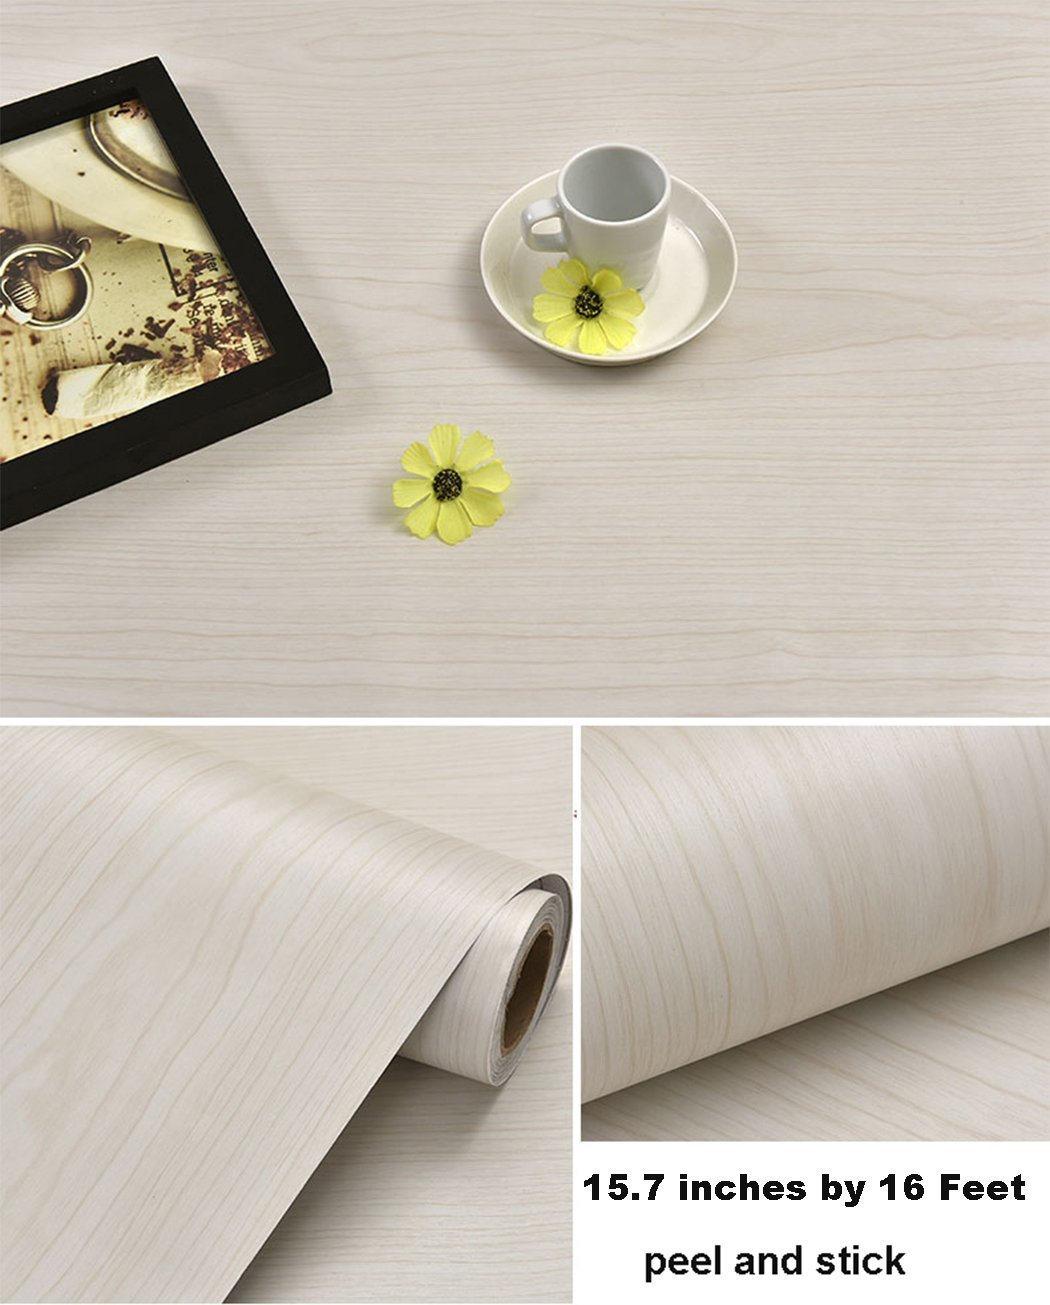 Products glow4u self adhesive light oak wood grain contact paper shelf drawer liner for kitchen cabinets shelves drawer cupboards table arts and crafts decal 15 7x197 inches